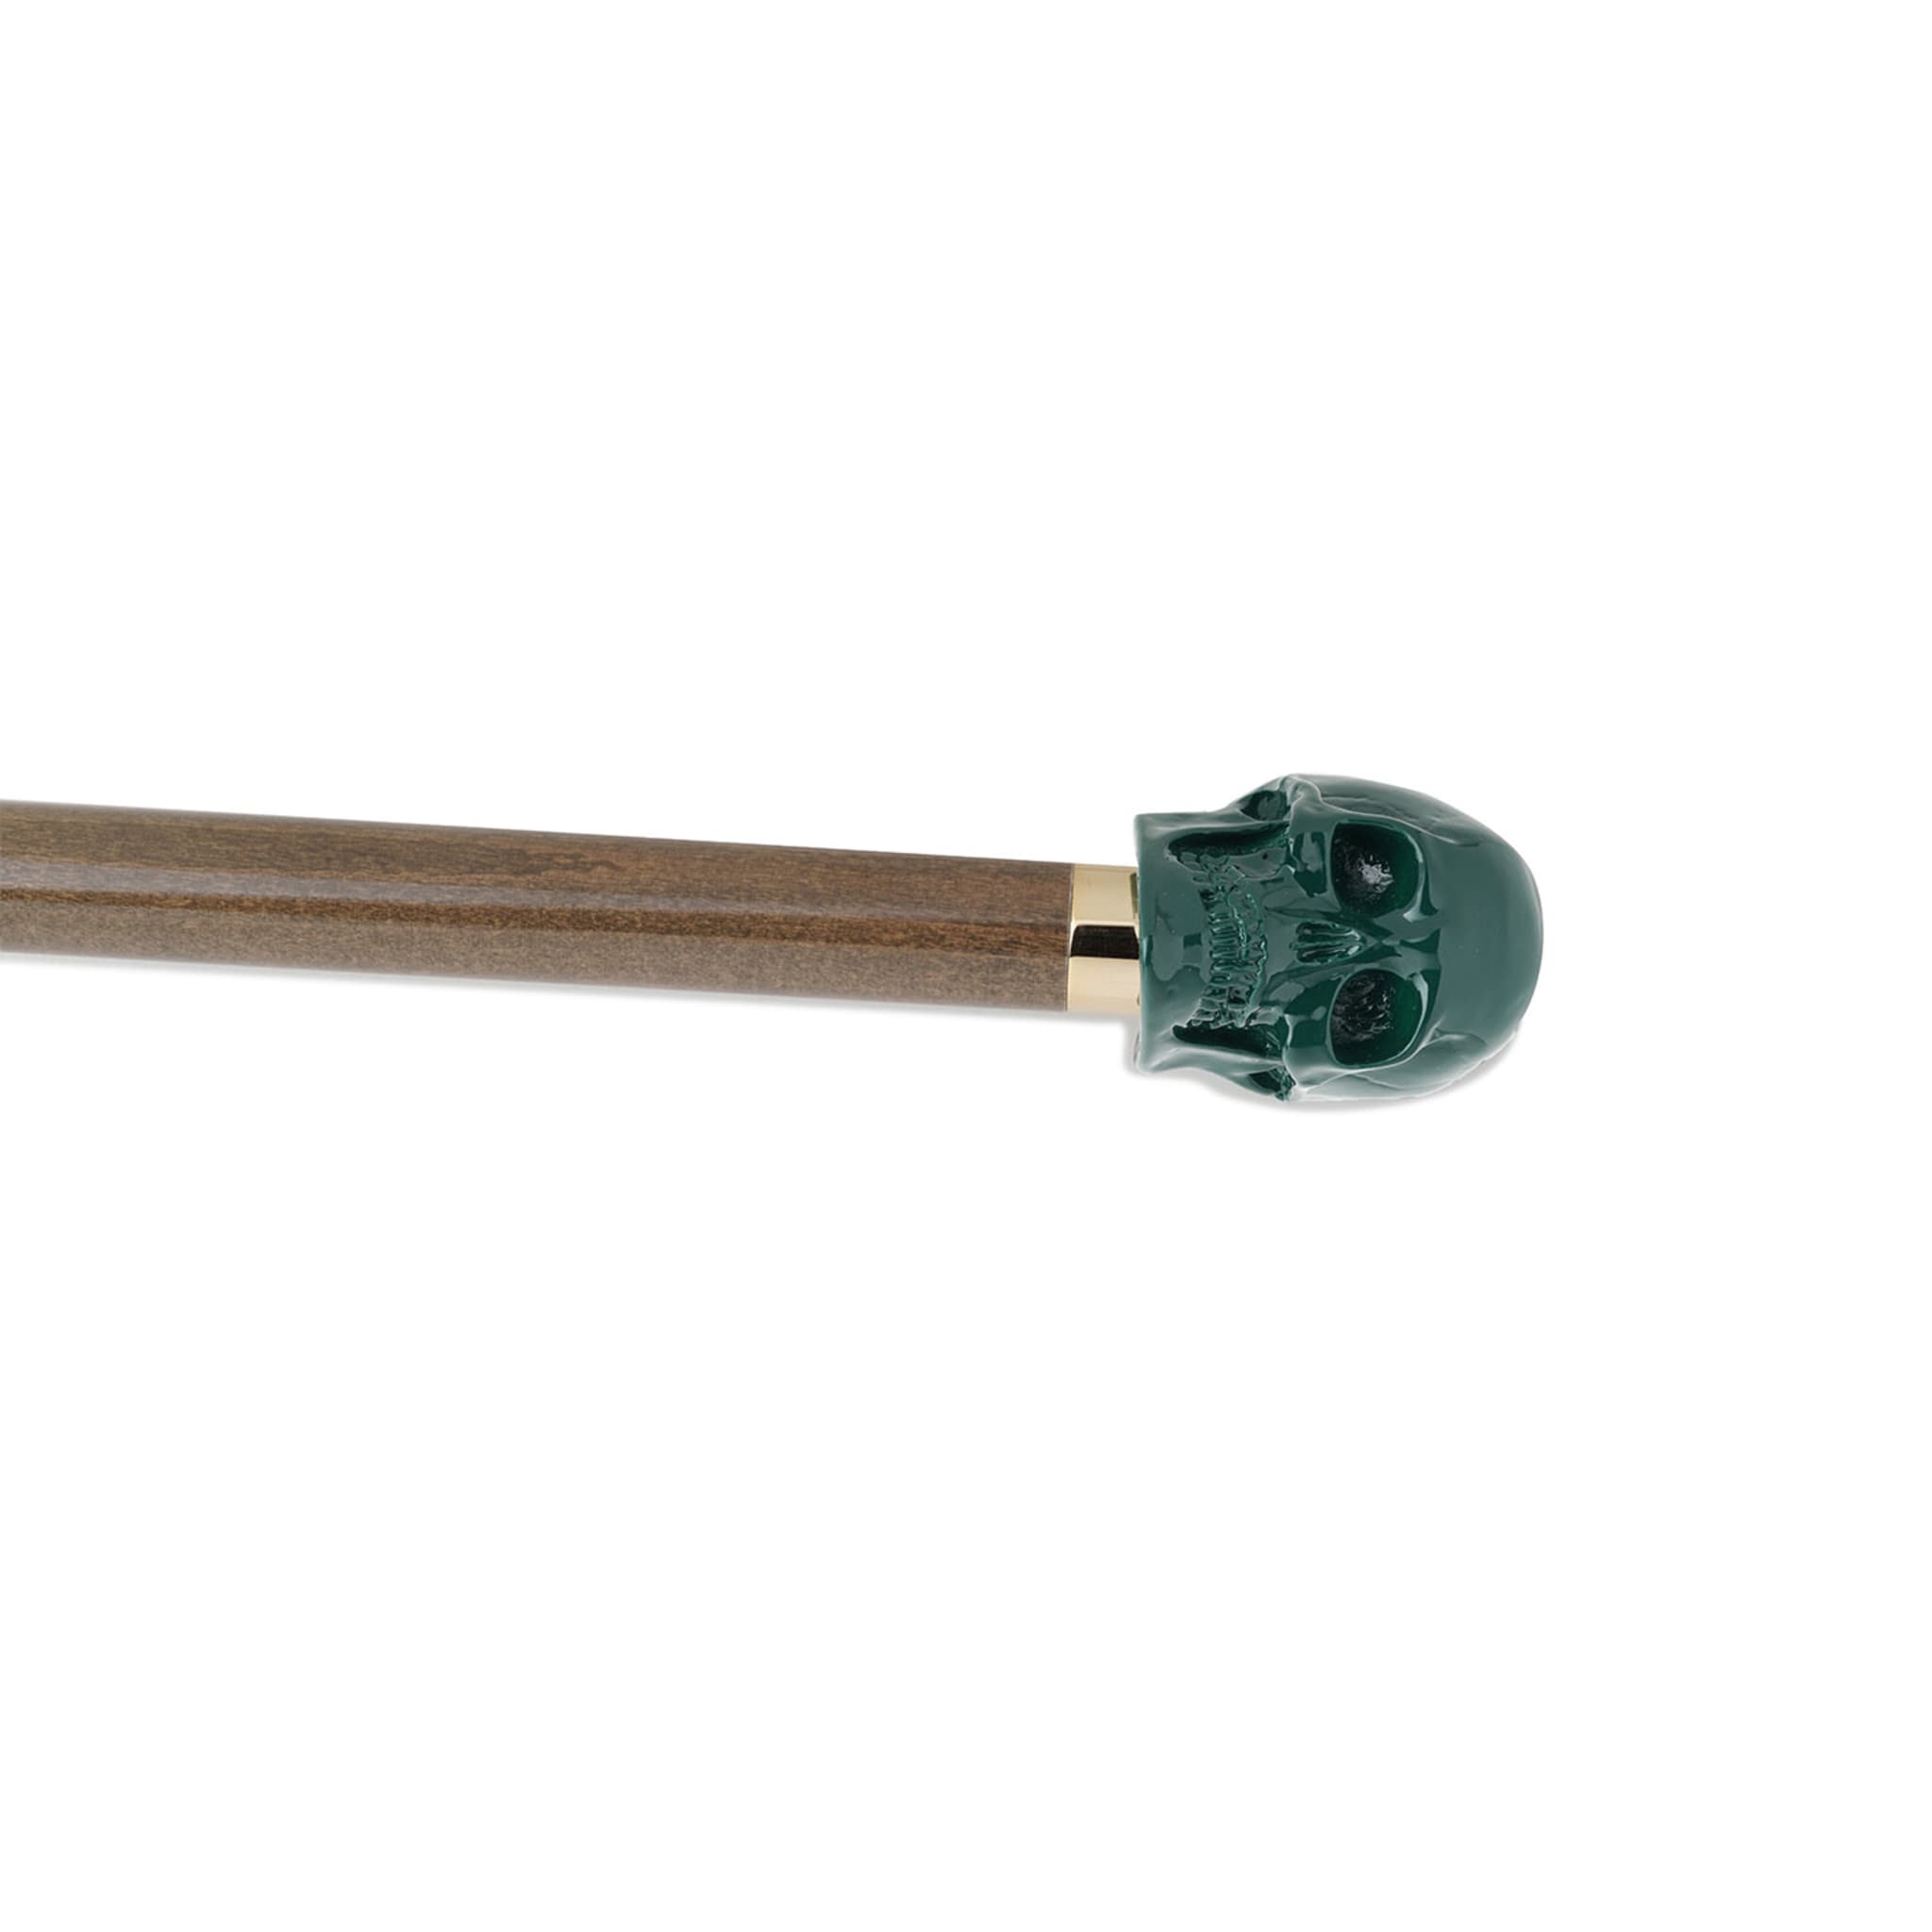 Taupe Ash Shoe Horn with Petrol-Blue Skull Handle - Alternative view 1